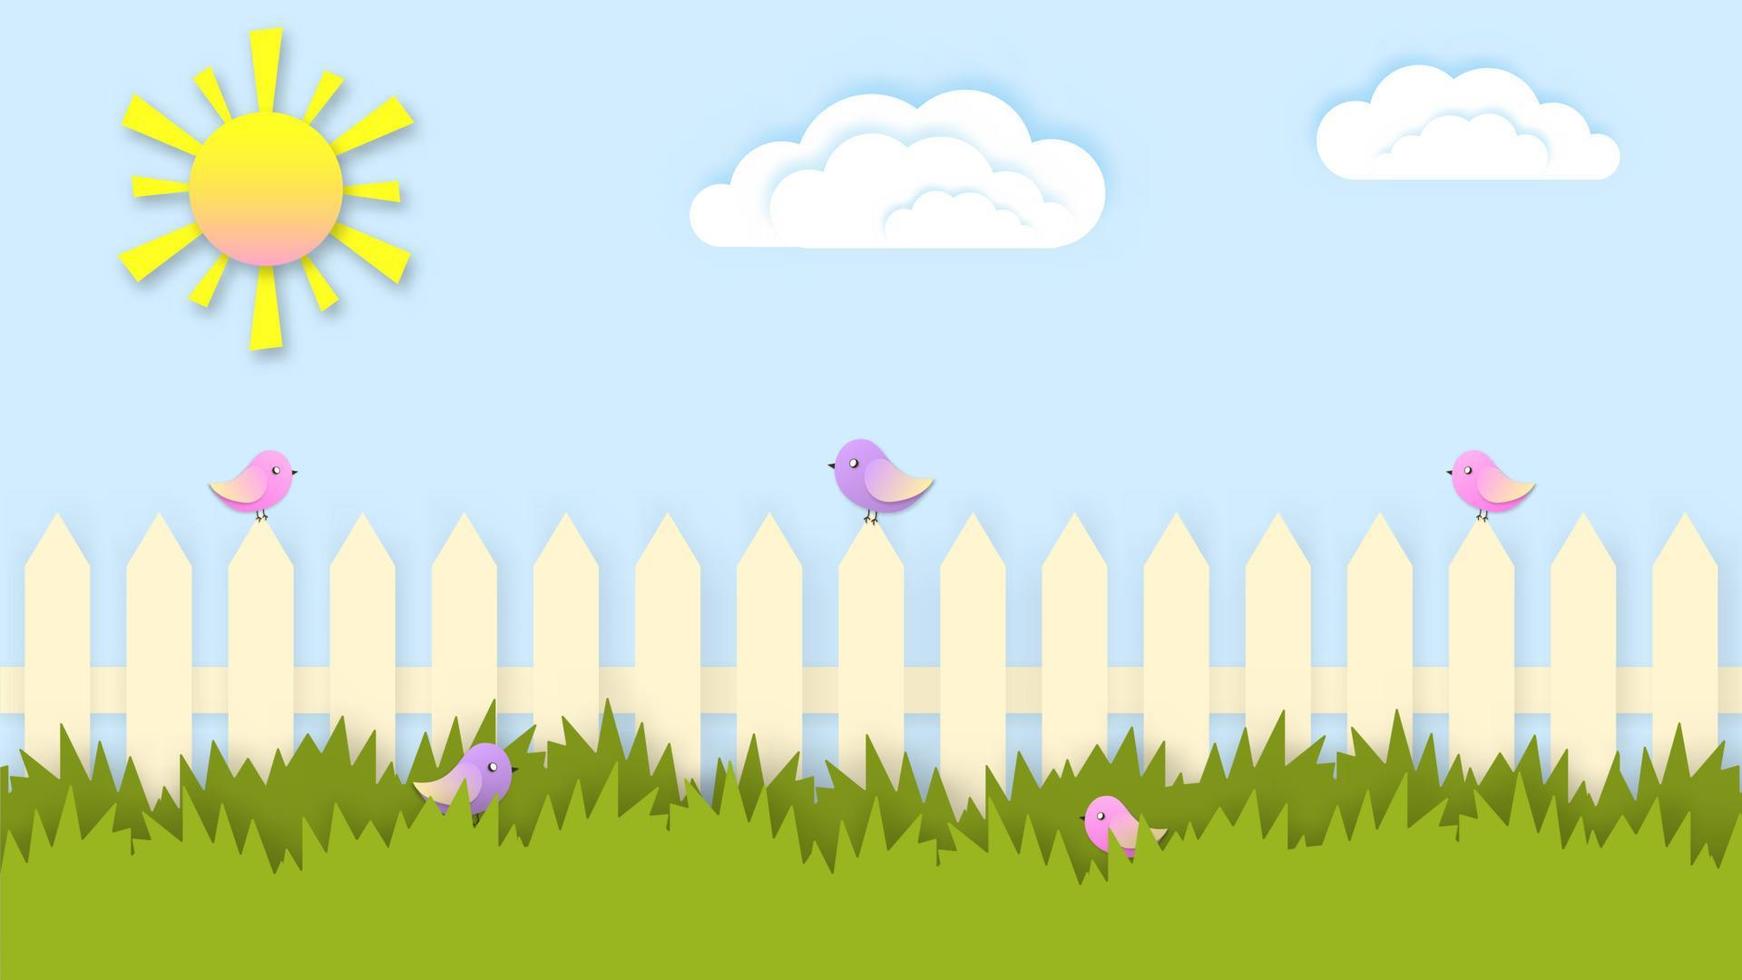 Rustic fence with birds and green grass illustration. Summer paper cut rural landscape with white picket fence and sparrows sitting and in bushes yellow gradient sun floating vector clouds.